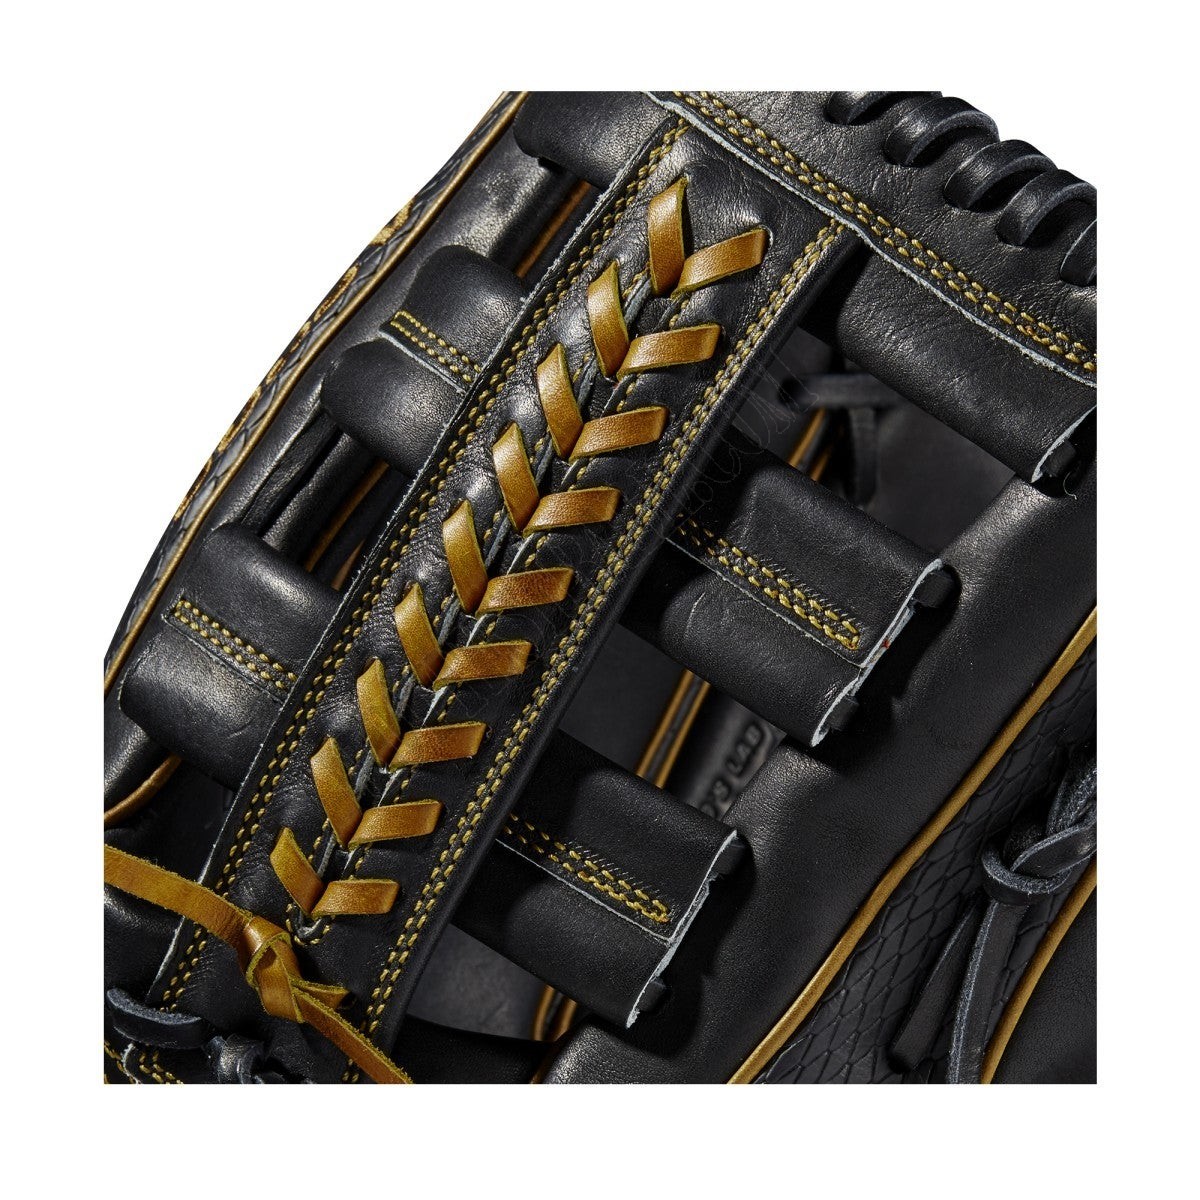 2021 Aso's Lab A2000 SA1275SS Outfield Baseball Glove ● Wilson Promotions - -5